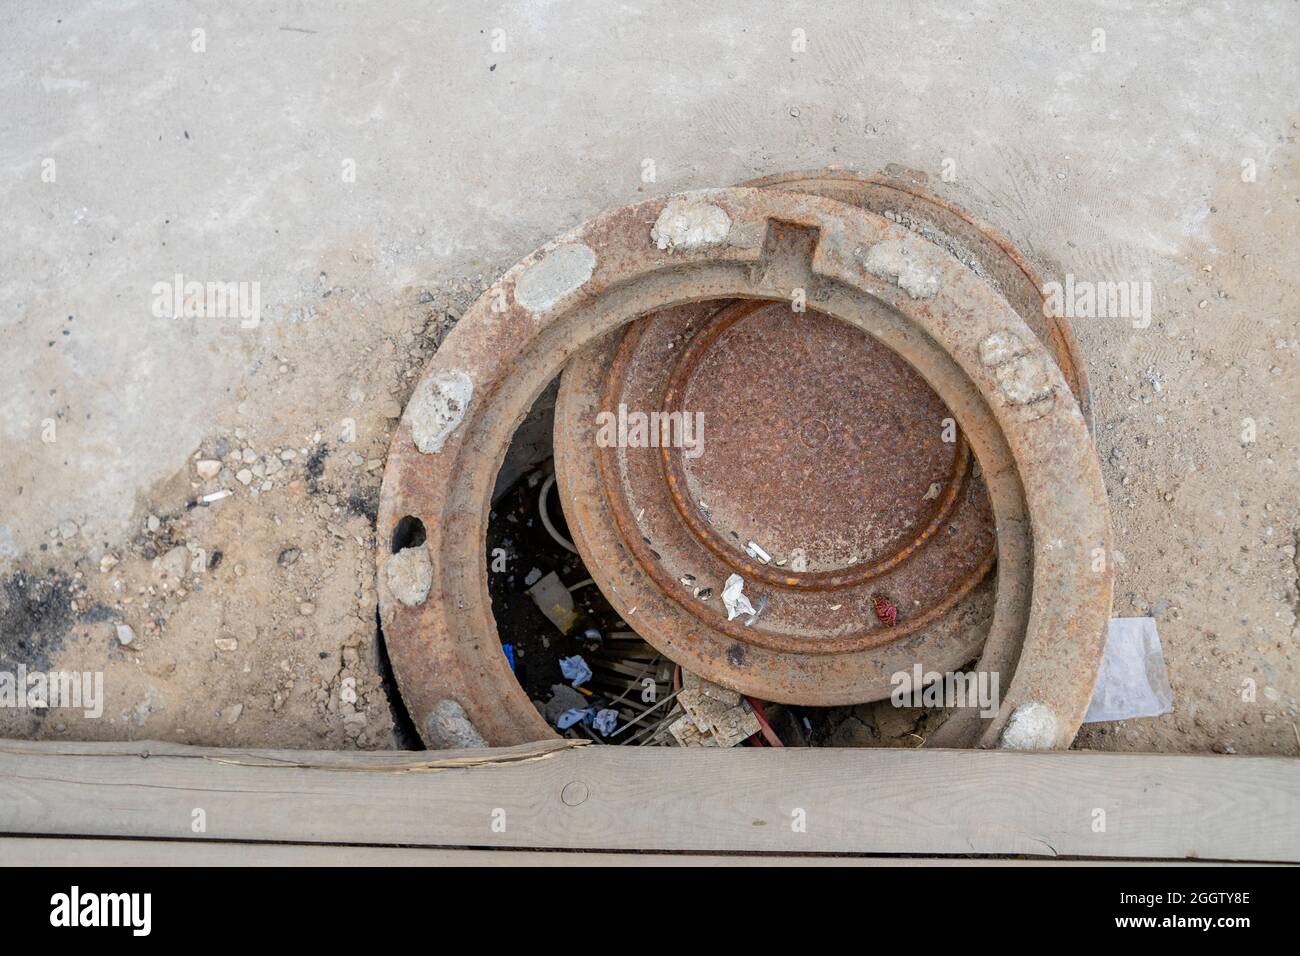 Misplaced rusty circular sewer lid over the drain hole with garbage inside, Moscow, Russia Stock Photo